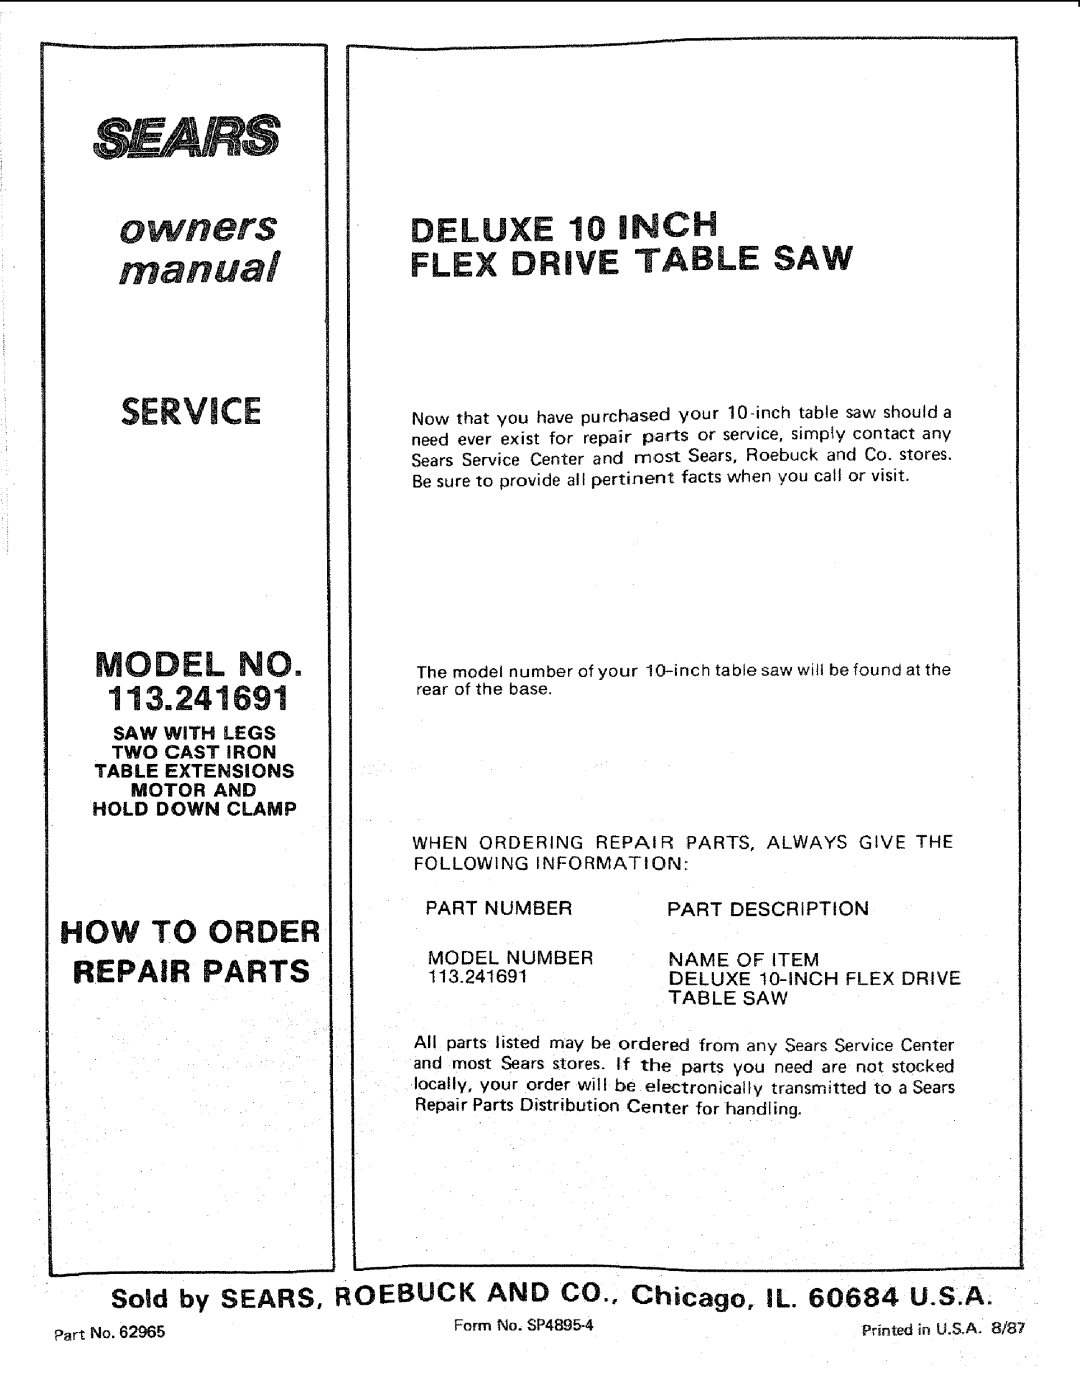 Sears 113.241591 owner manual Service, 113.241691, DELUXE 10 iNCH FLEX DRIVE TABLE SAW, Model No, How To Order Repair Parts 